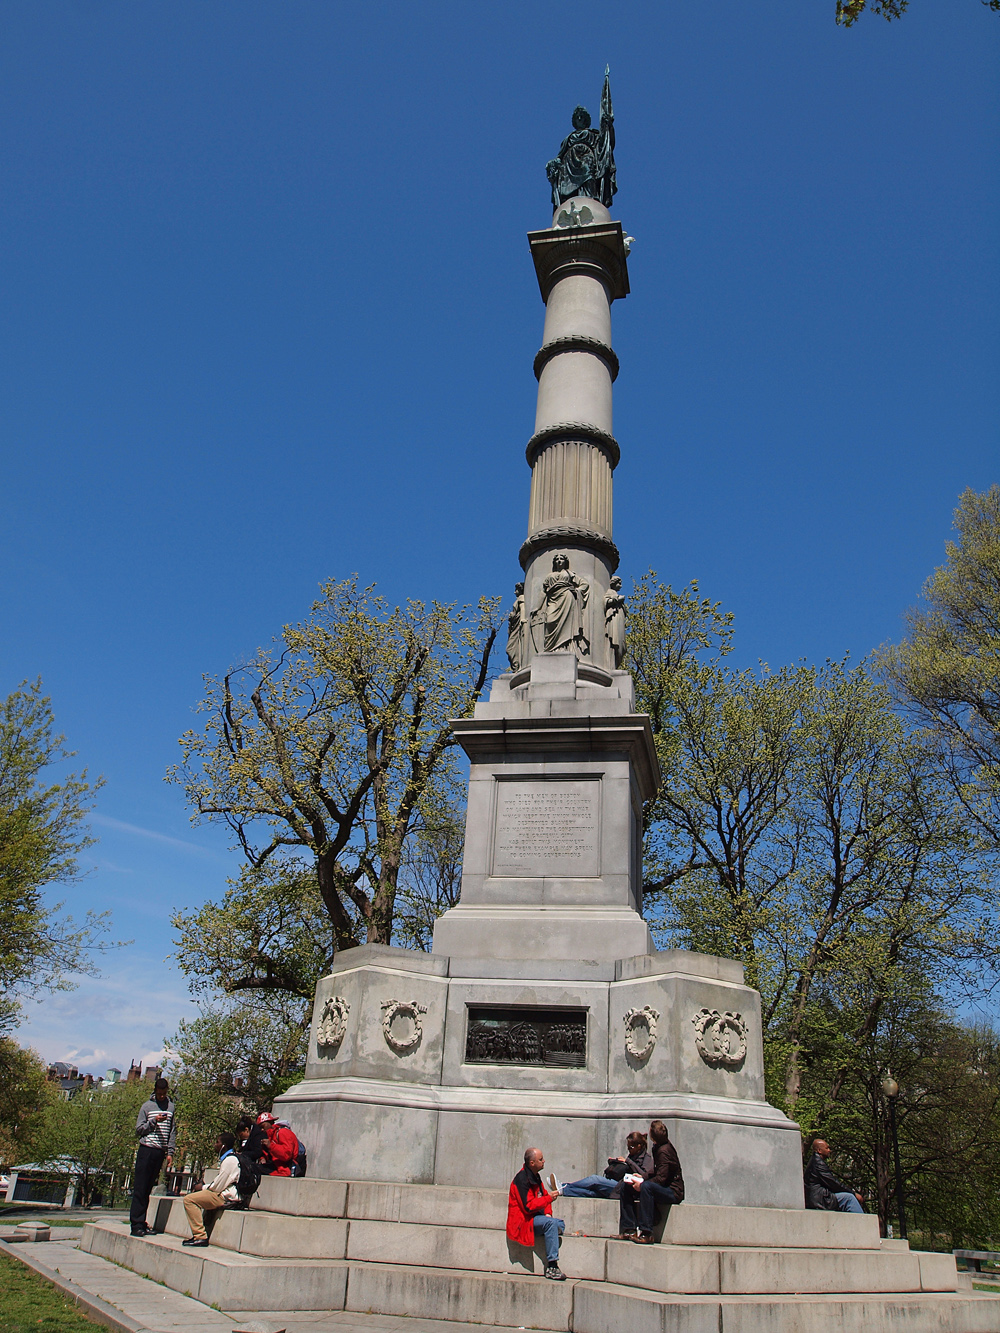 The Boston Common Soldier and Sailer monument.